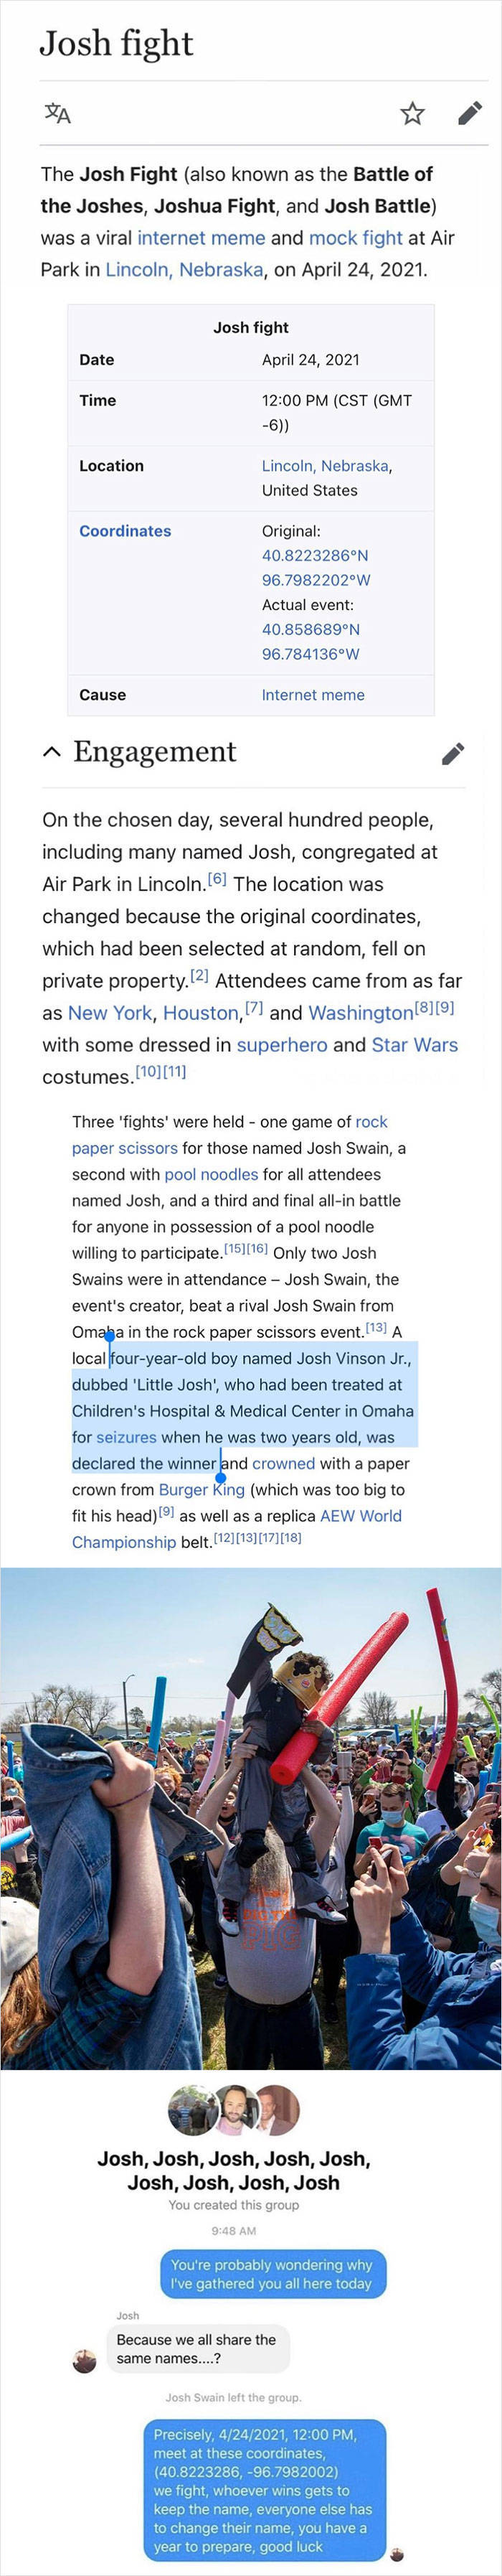 These “Wikipedia” Articles Are Pretty Weird…